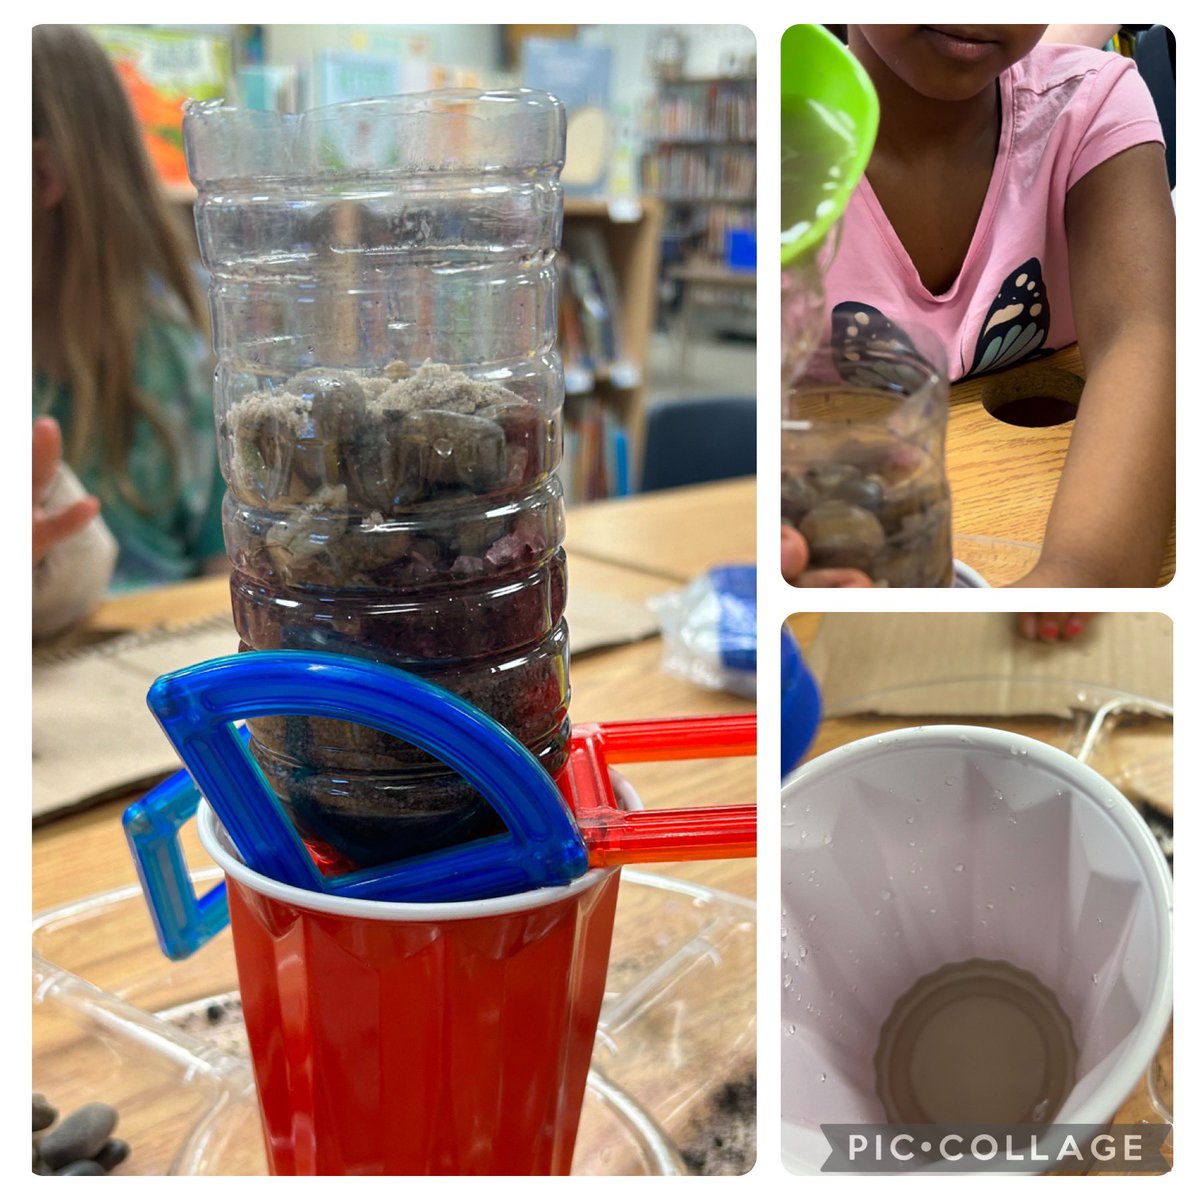 Water systems & STEM with grade 2s in the library. How can we create a water filter for puddle water? How can we stabilize it so we don’t have to hold it? “Let’s run it through the filter 2x Ms De Melo to see if it becomes cleaner!” #SchoolLibraryJoy @npersaudLC4